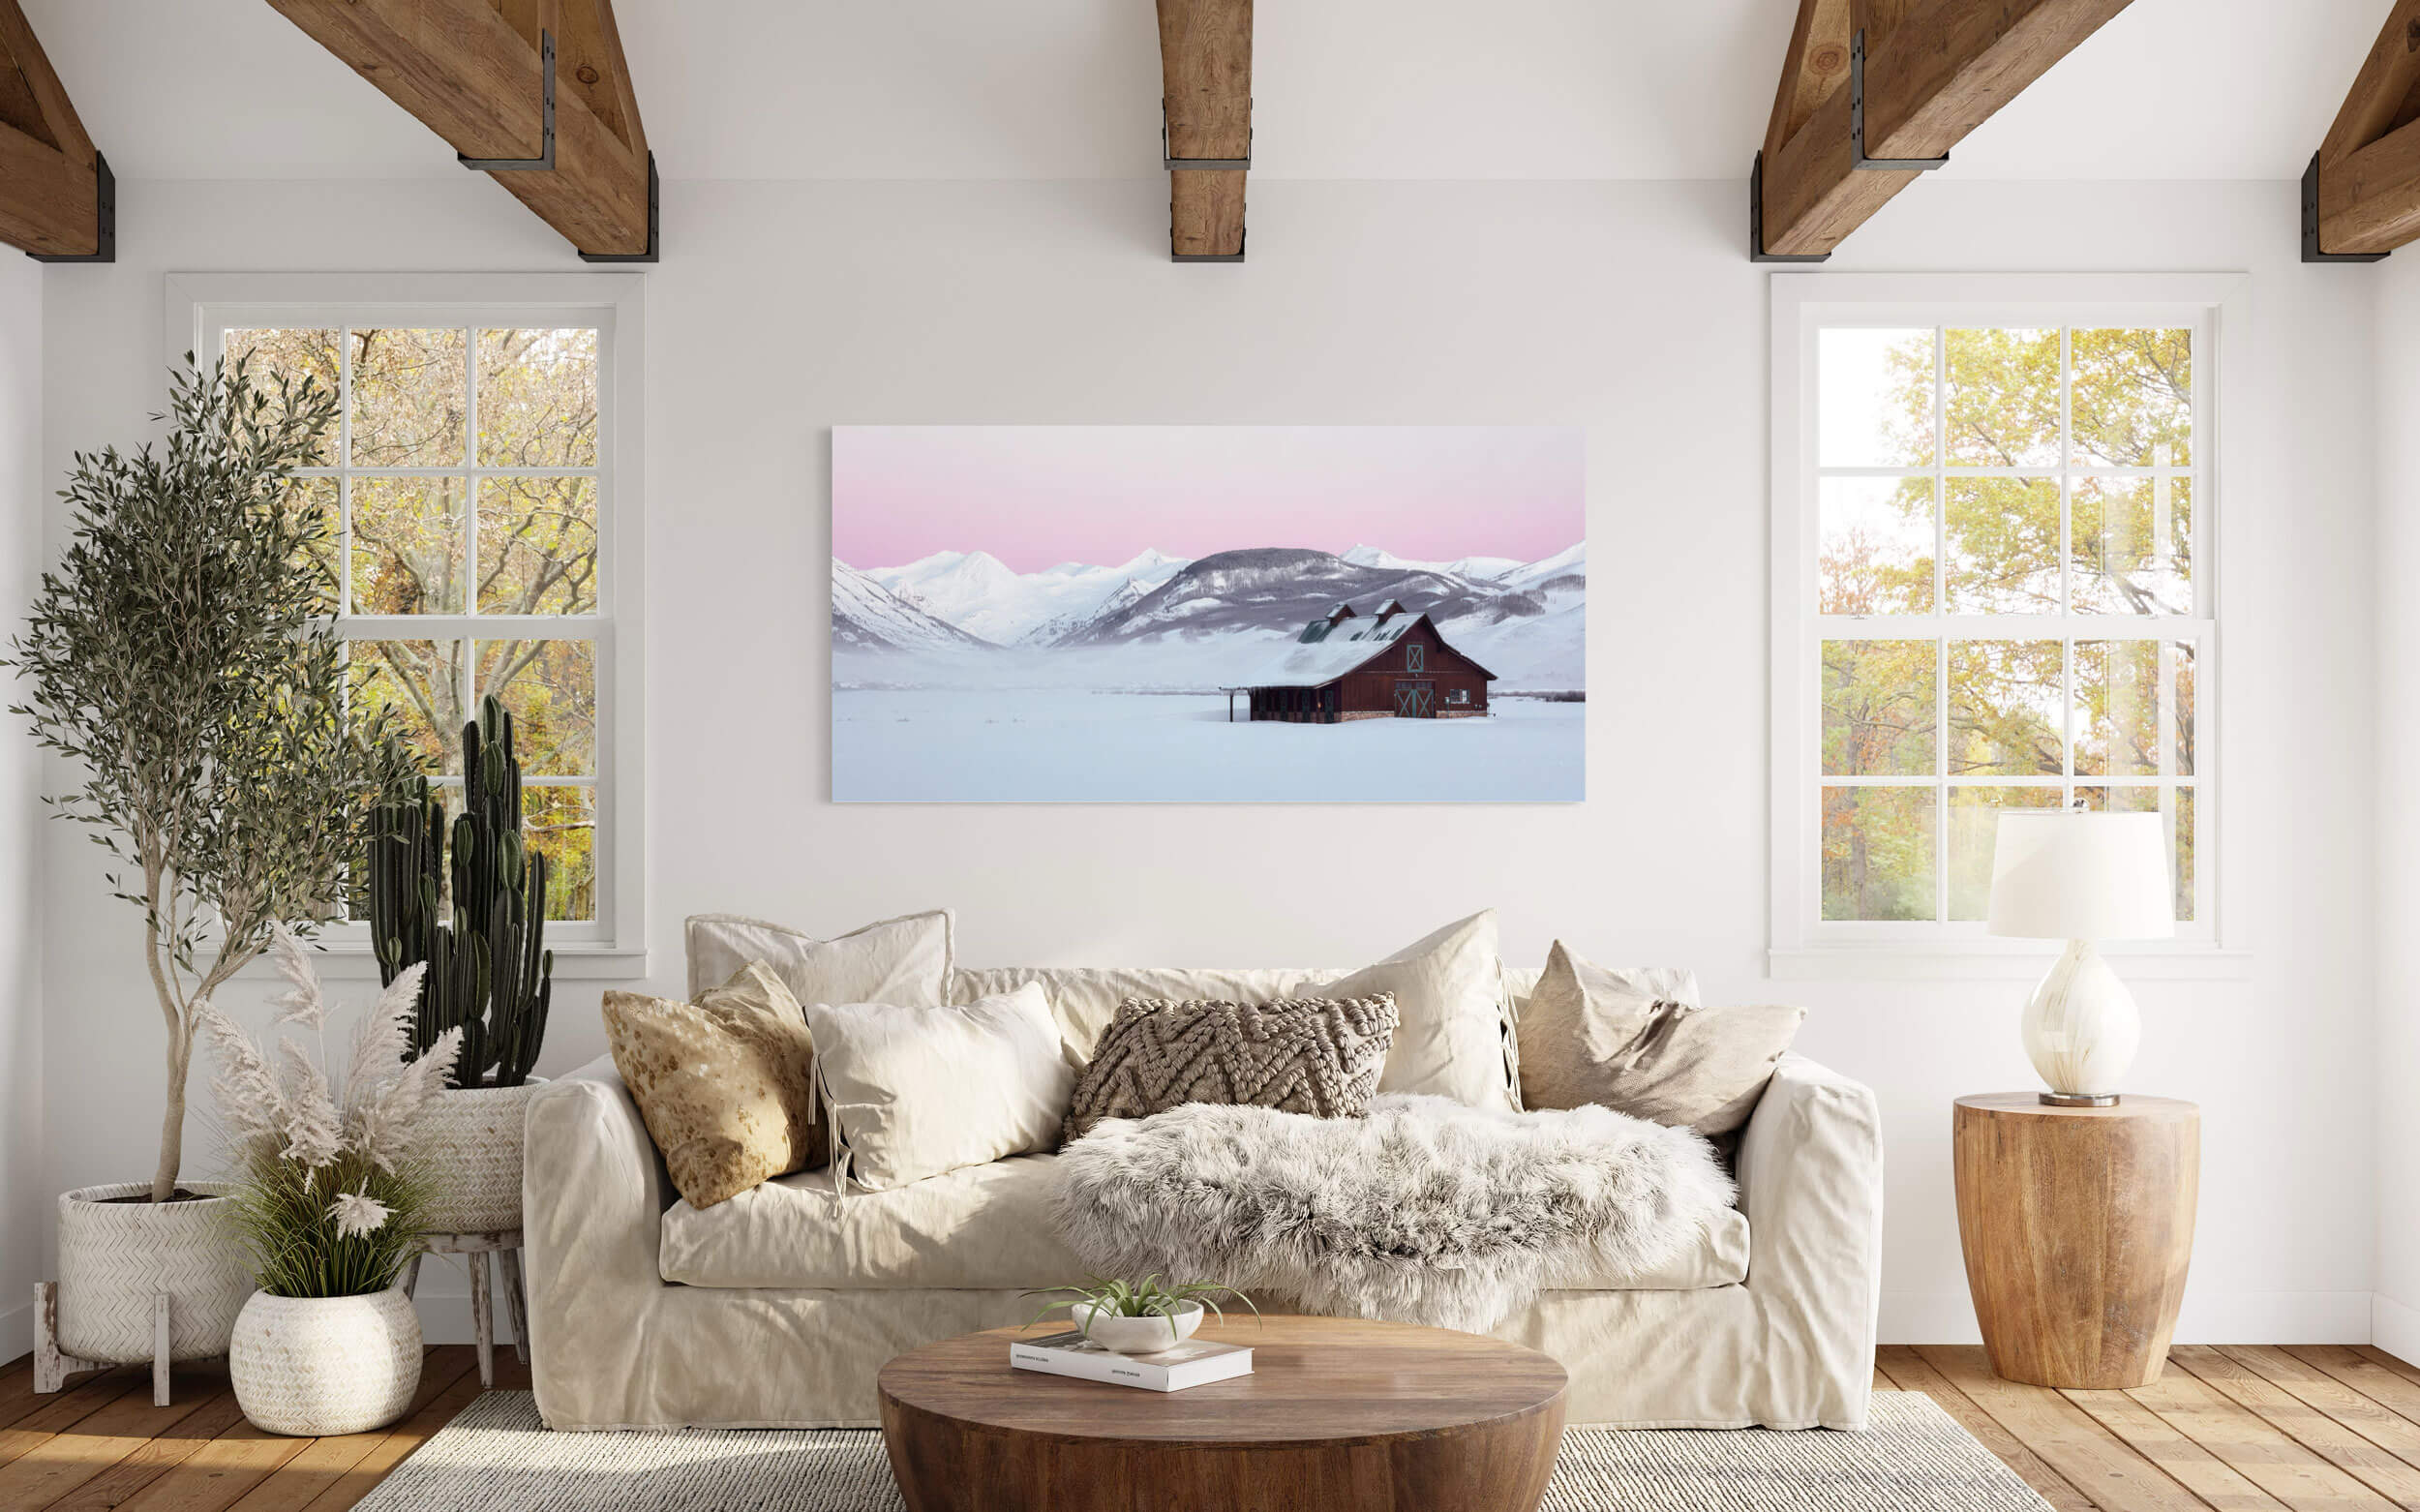 A Crested Butte winter picture created at sunrise hangs in a living room.